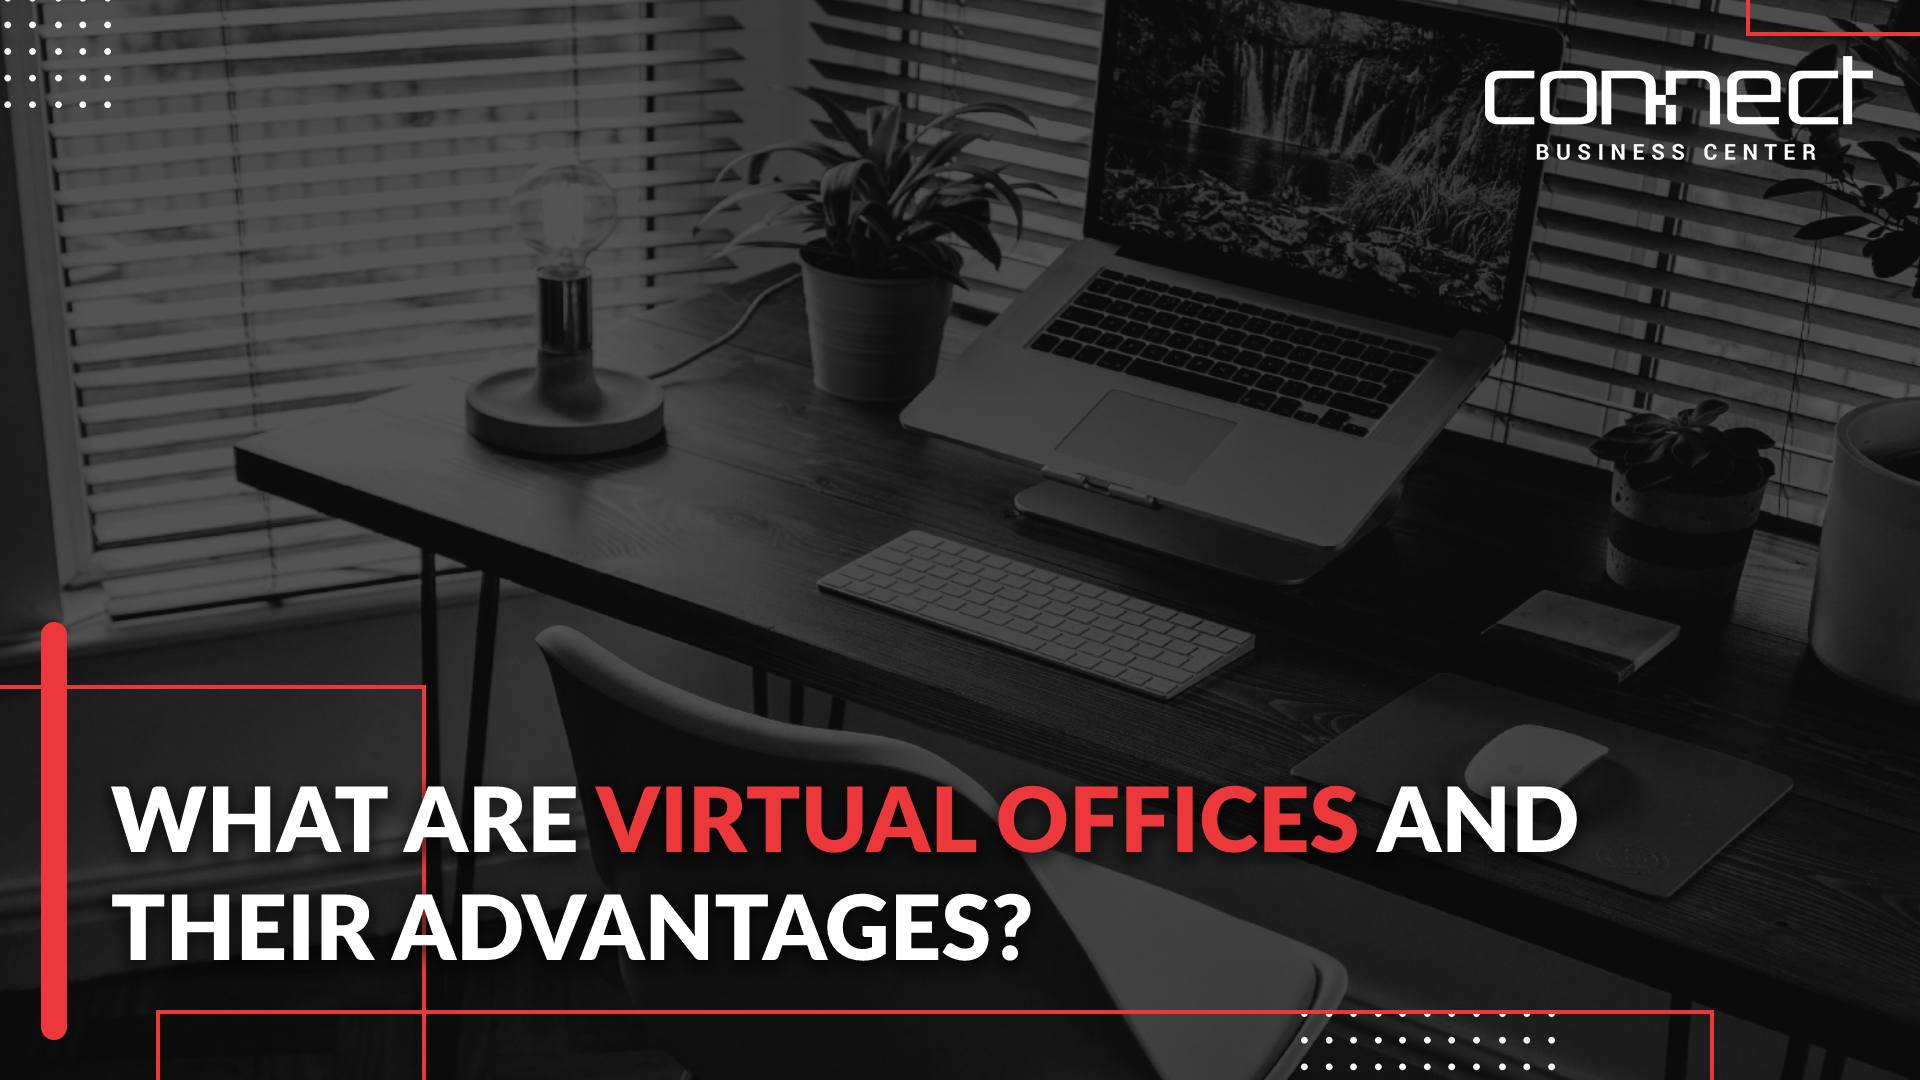 Virtual offices